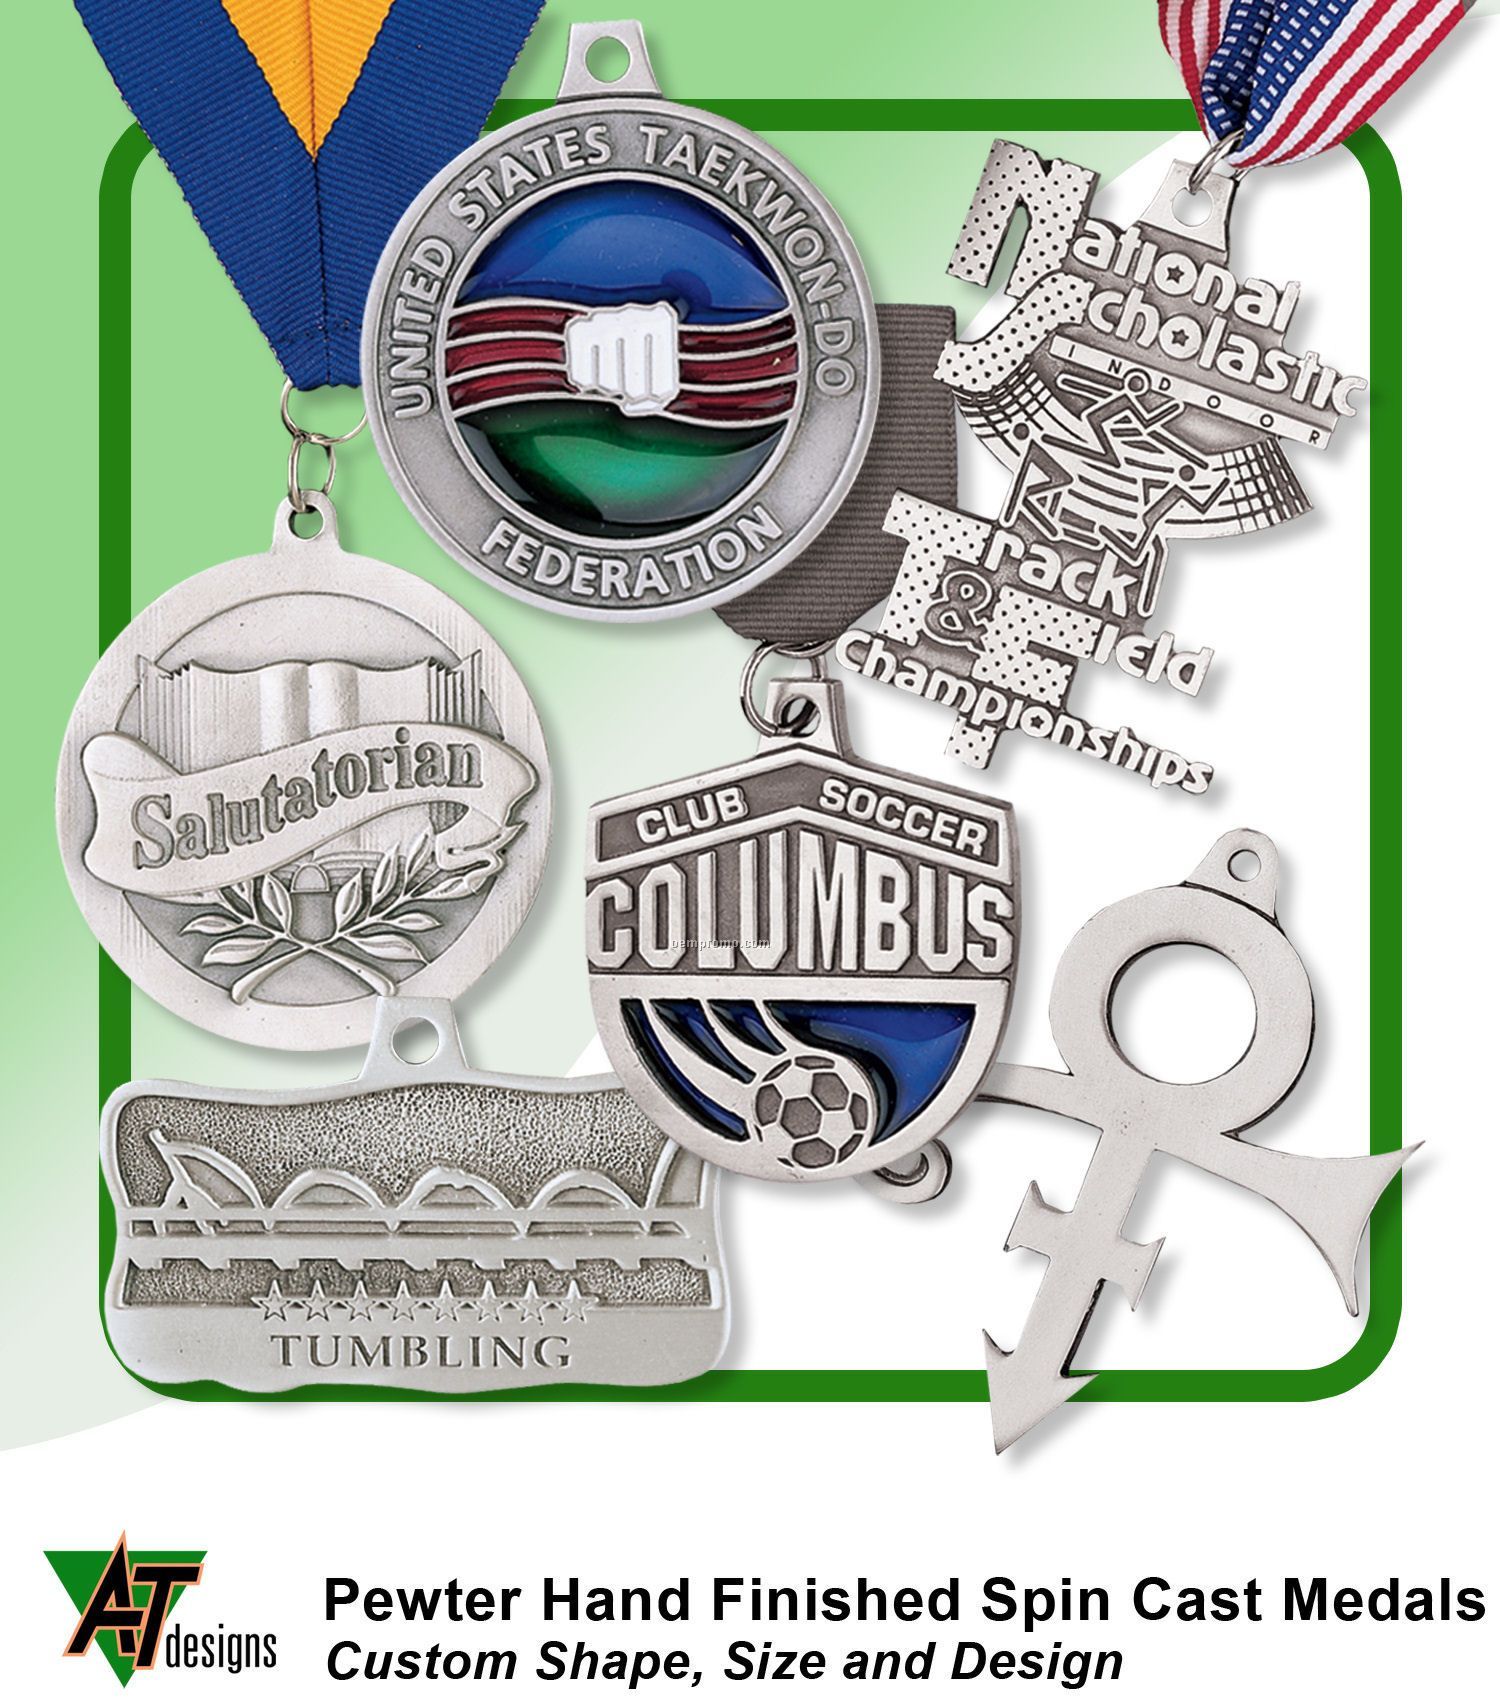 Pewter Medals Spin Cast (1-1/4